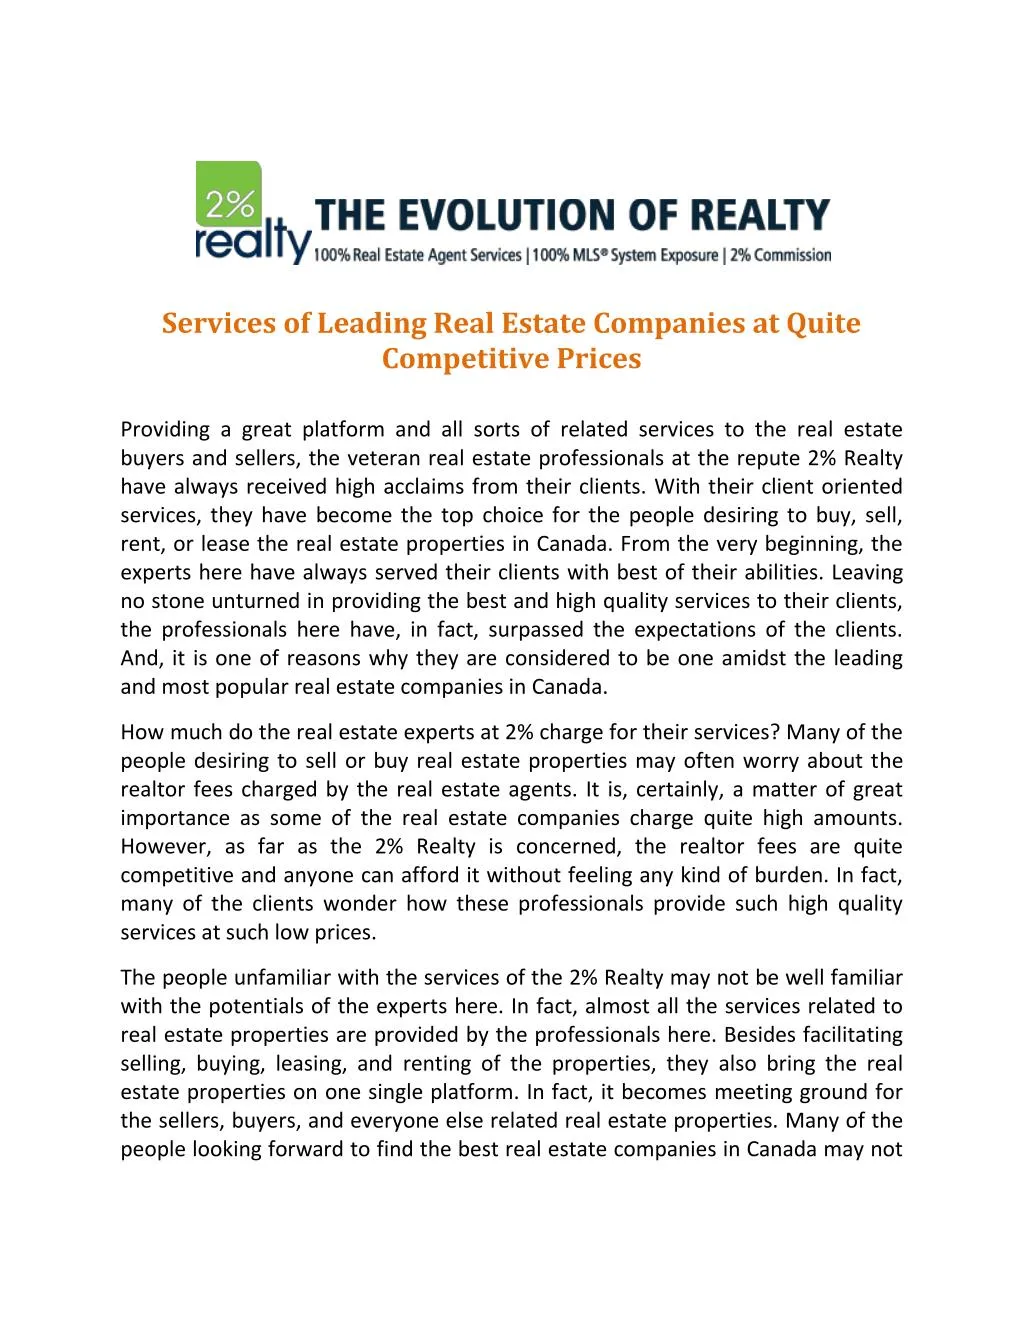 services of leading real estate companies